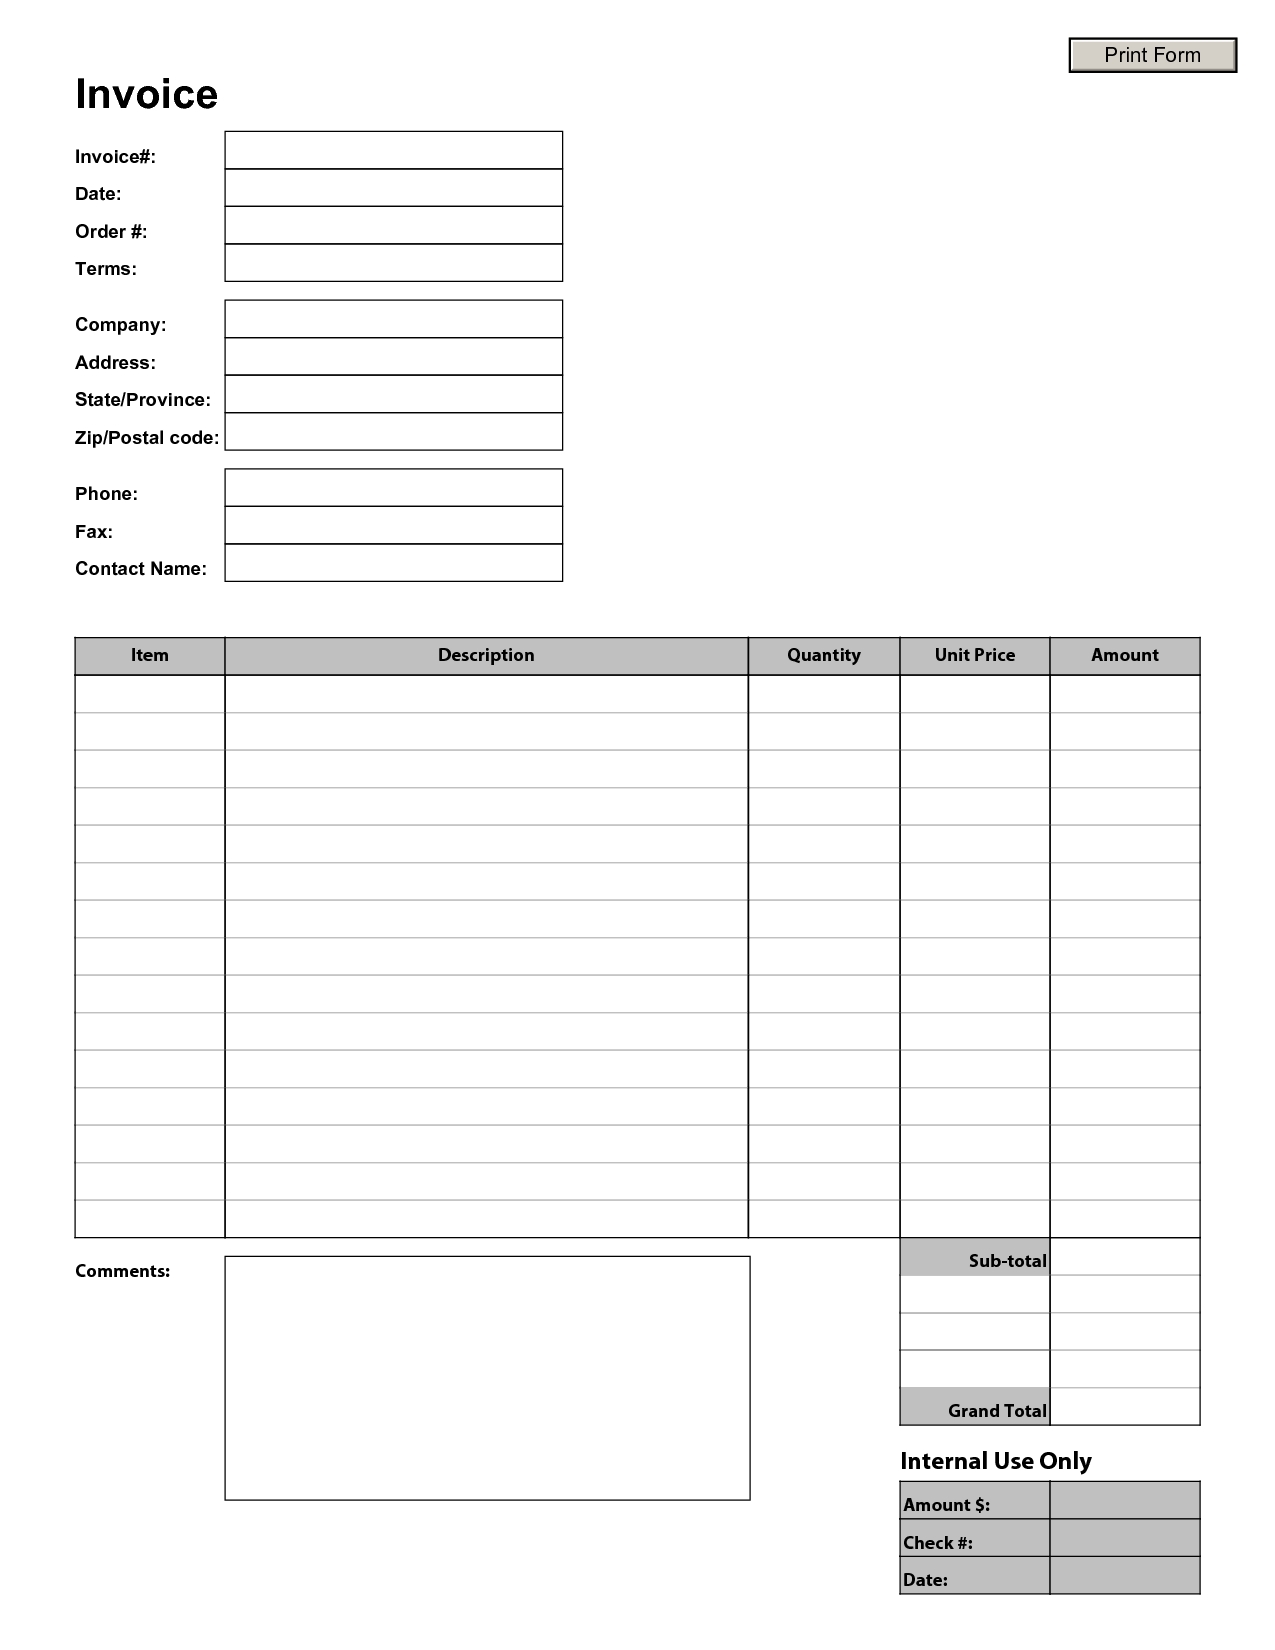 blank invoice template blank invoice free blank invoice forms